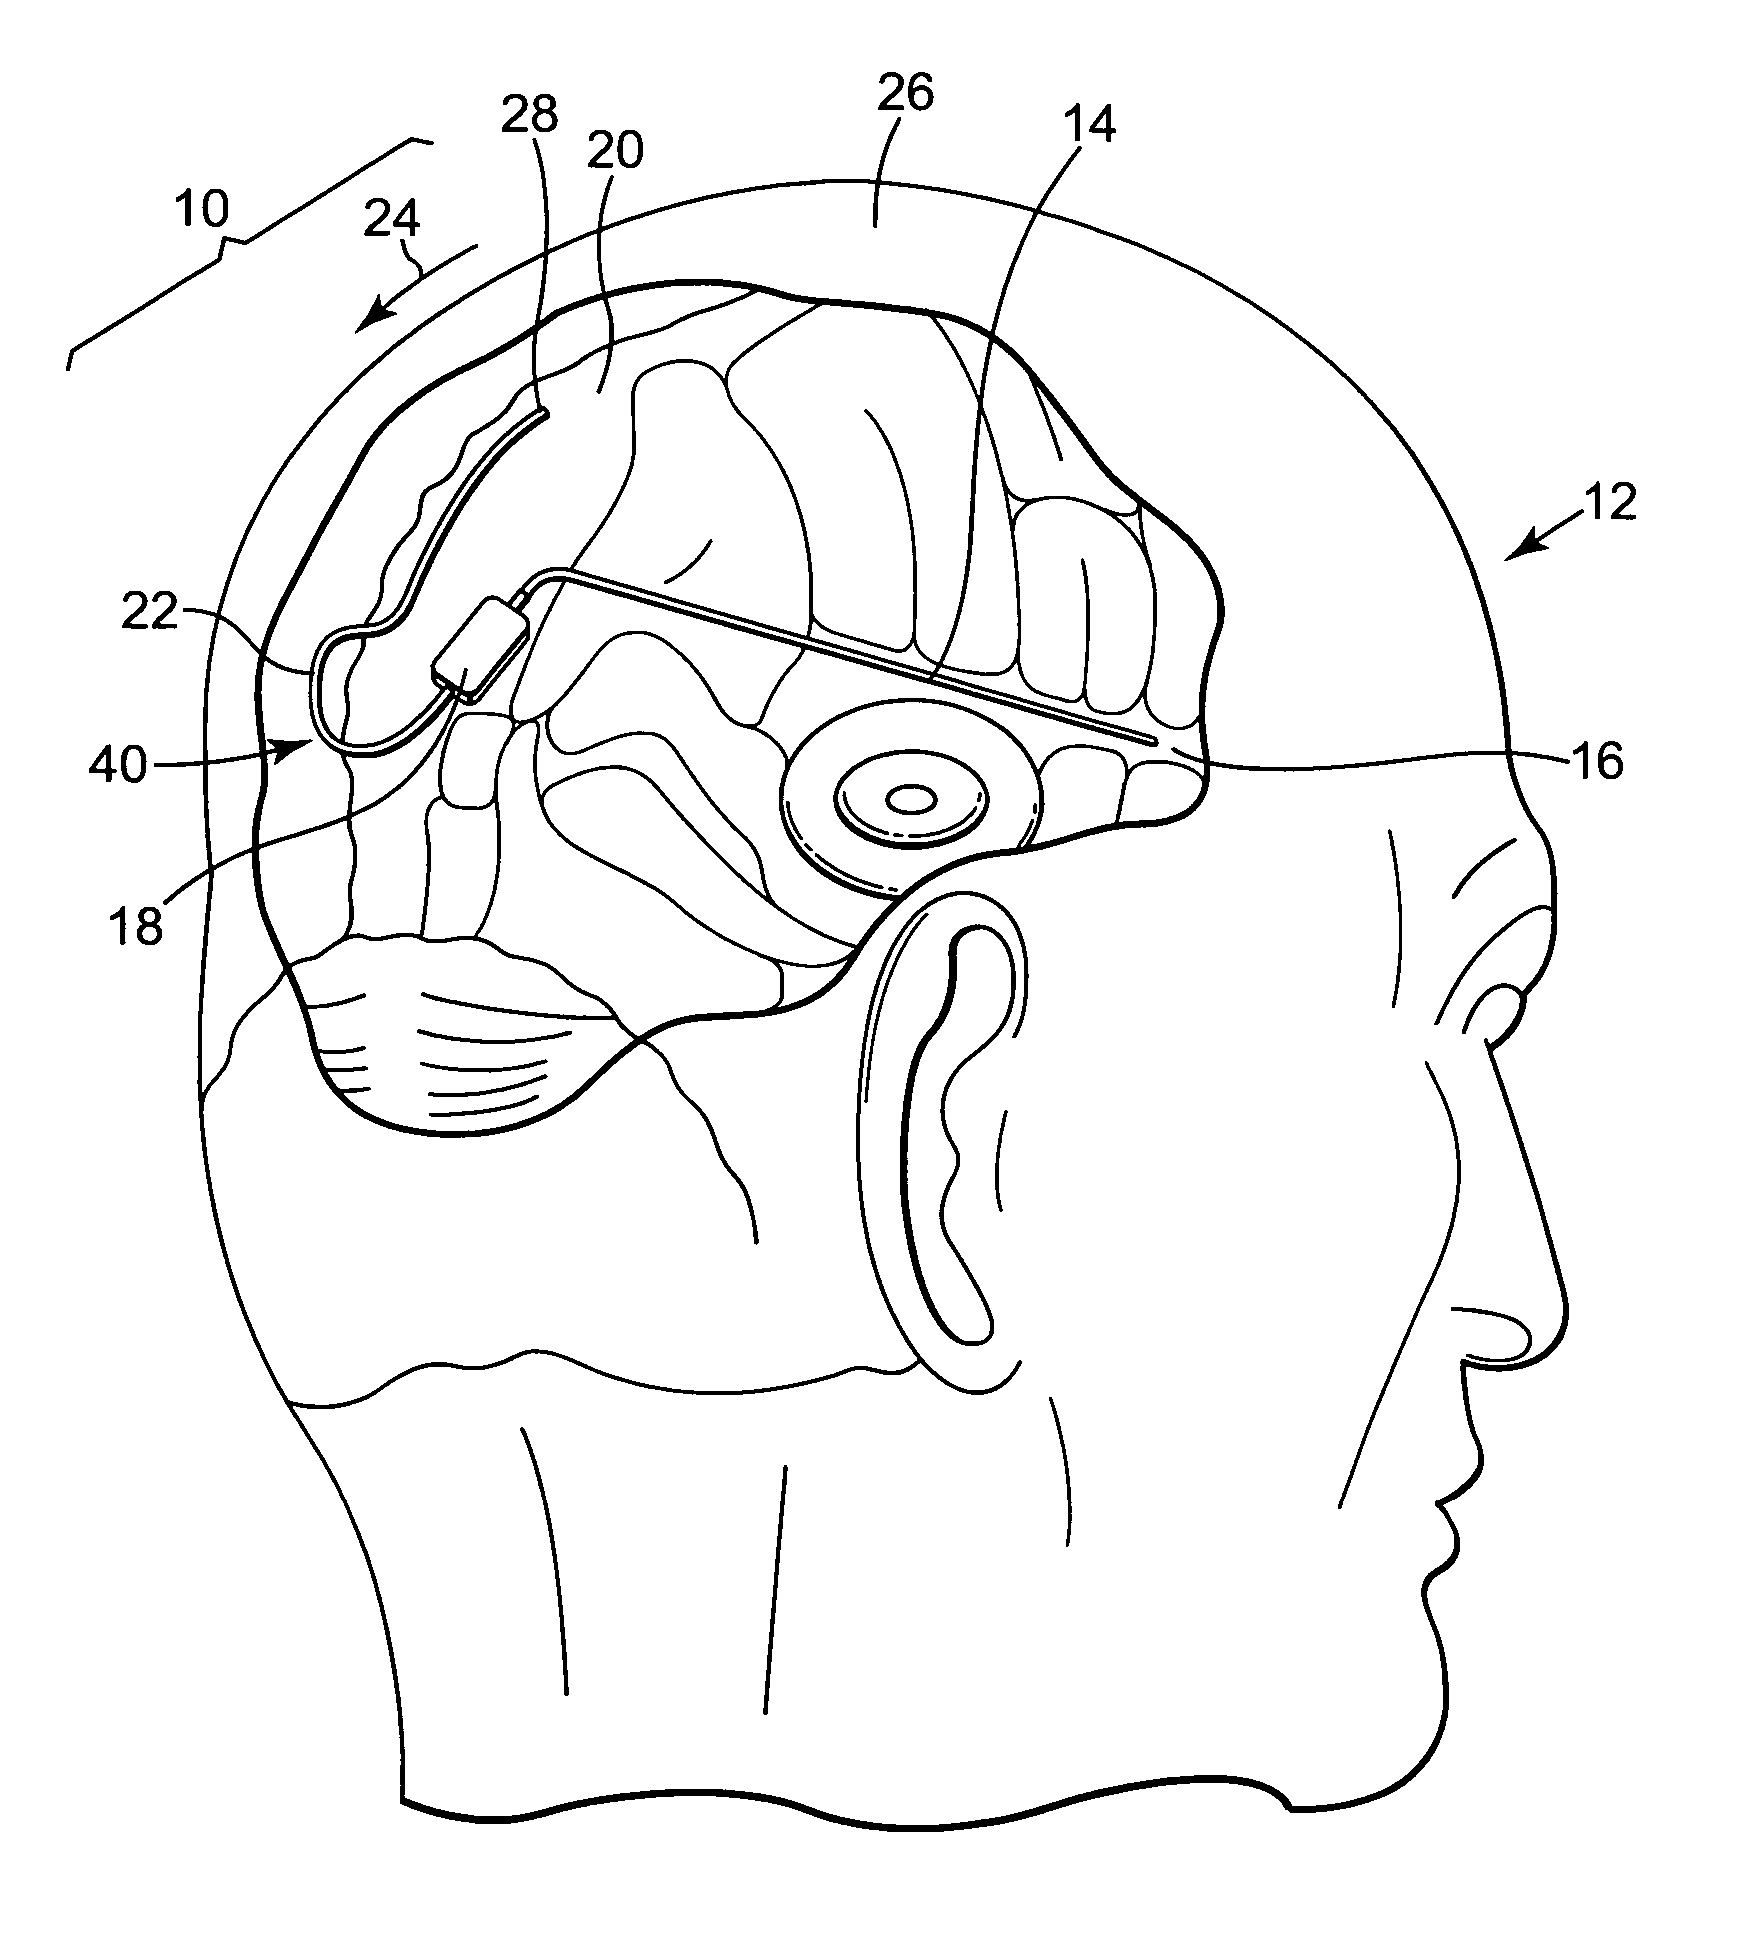 Apparatus and method for retrograde placement of sagittal sinus drainage catheter